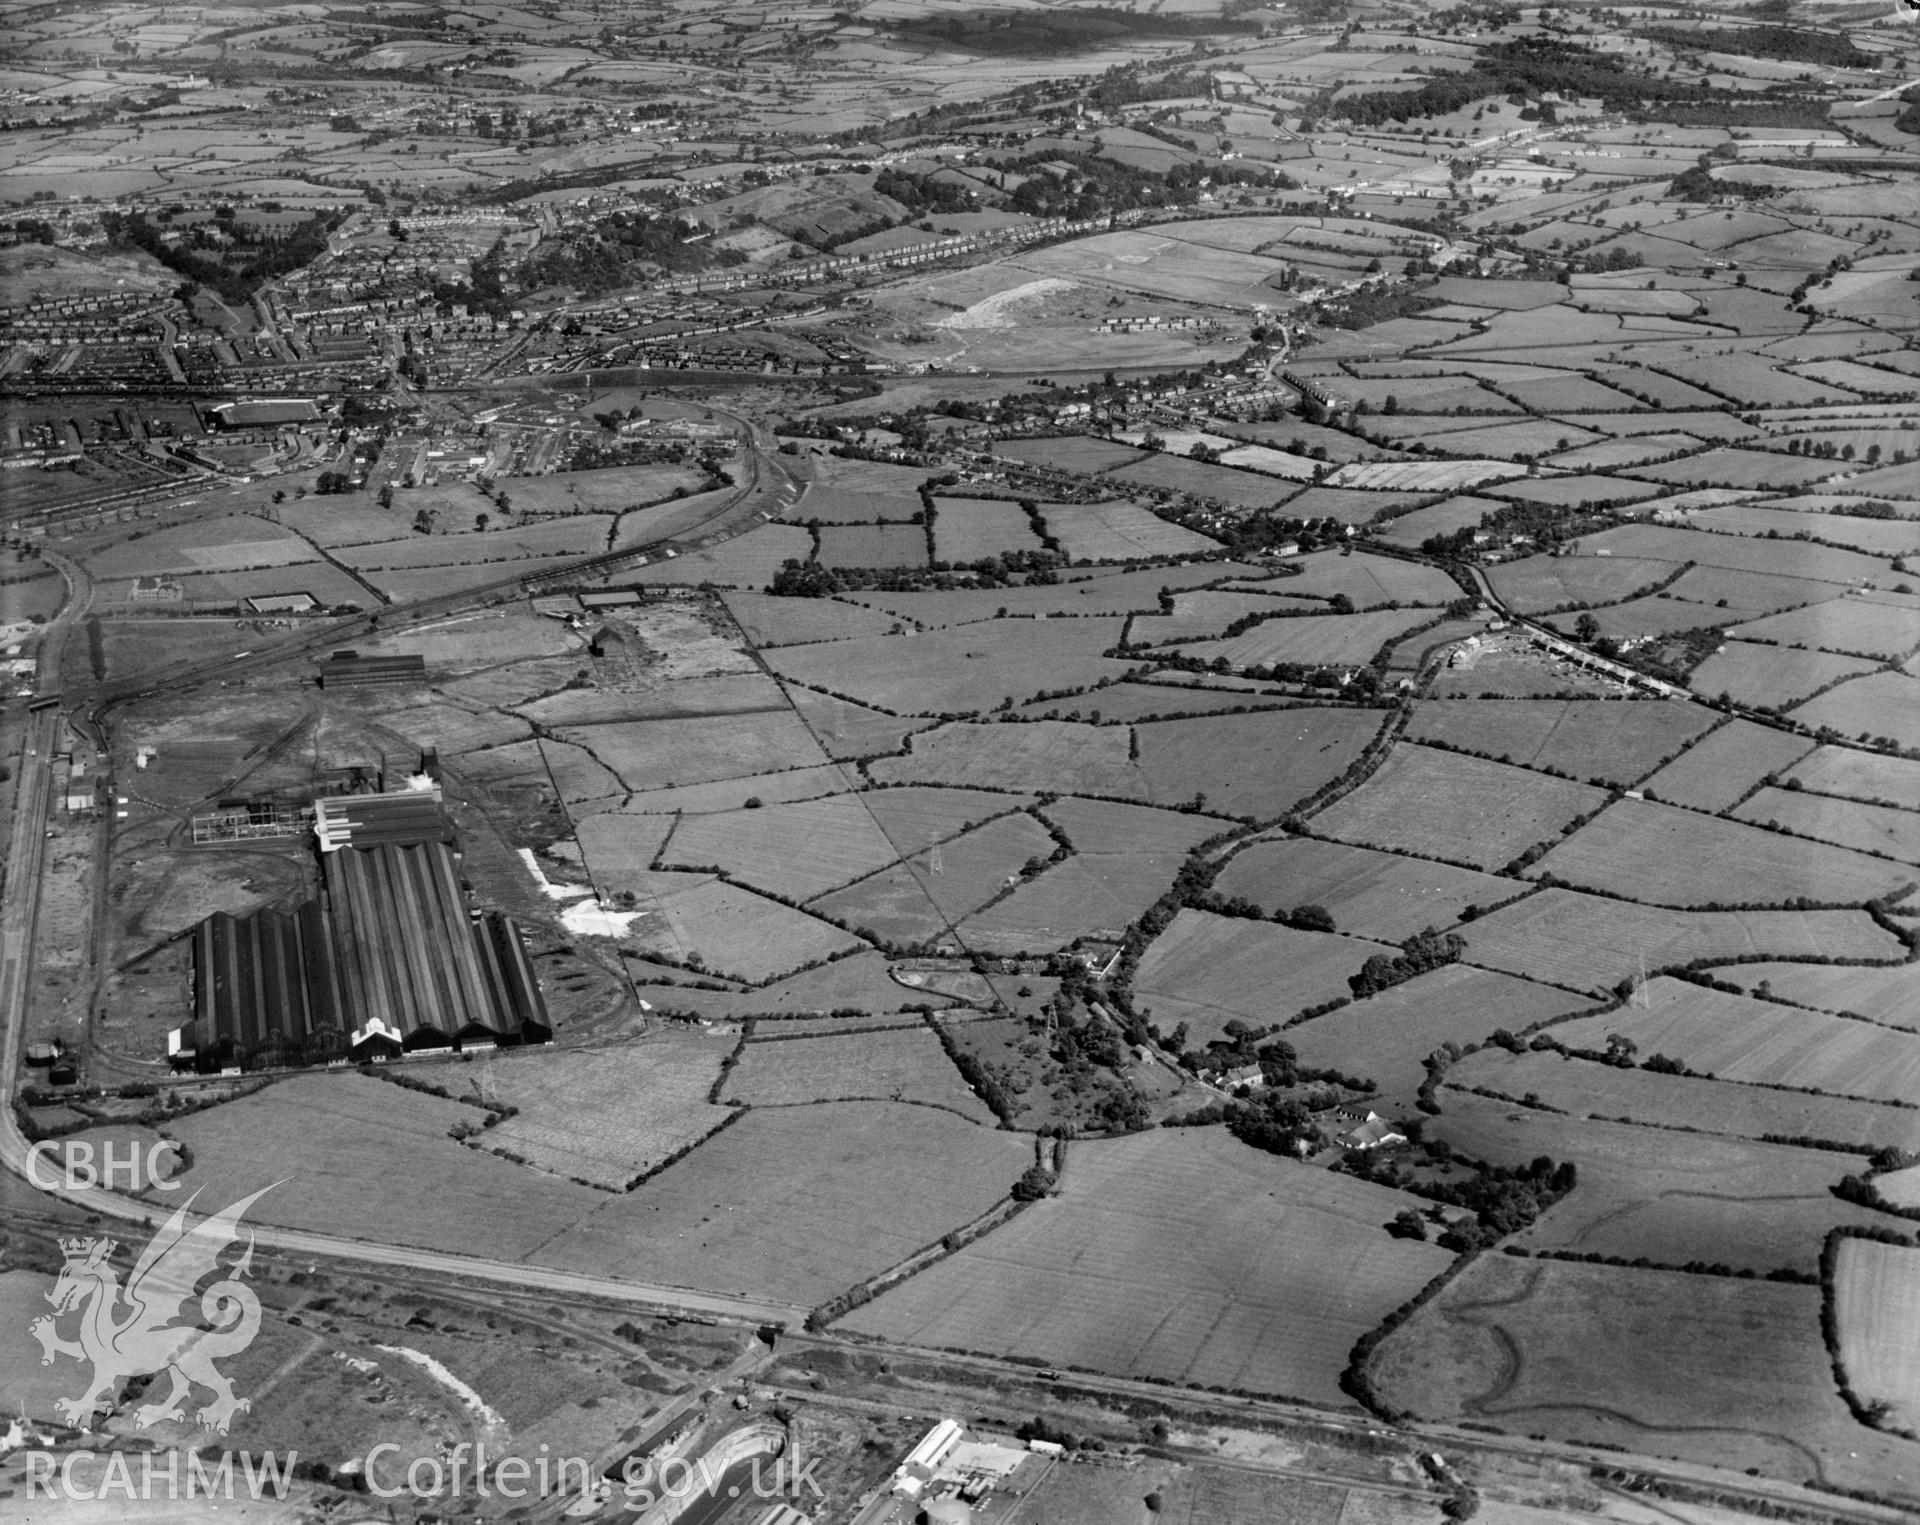 View of Newport showing Orb Steelworks, oblique aerial view. 5?x4? black and white glass plate negative.